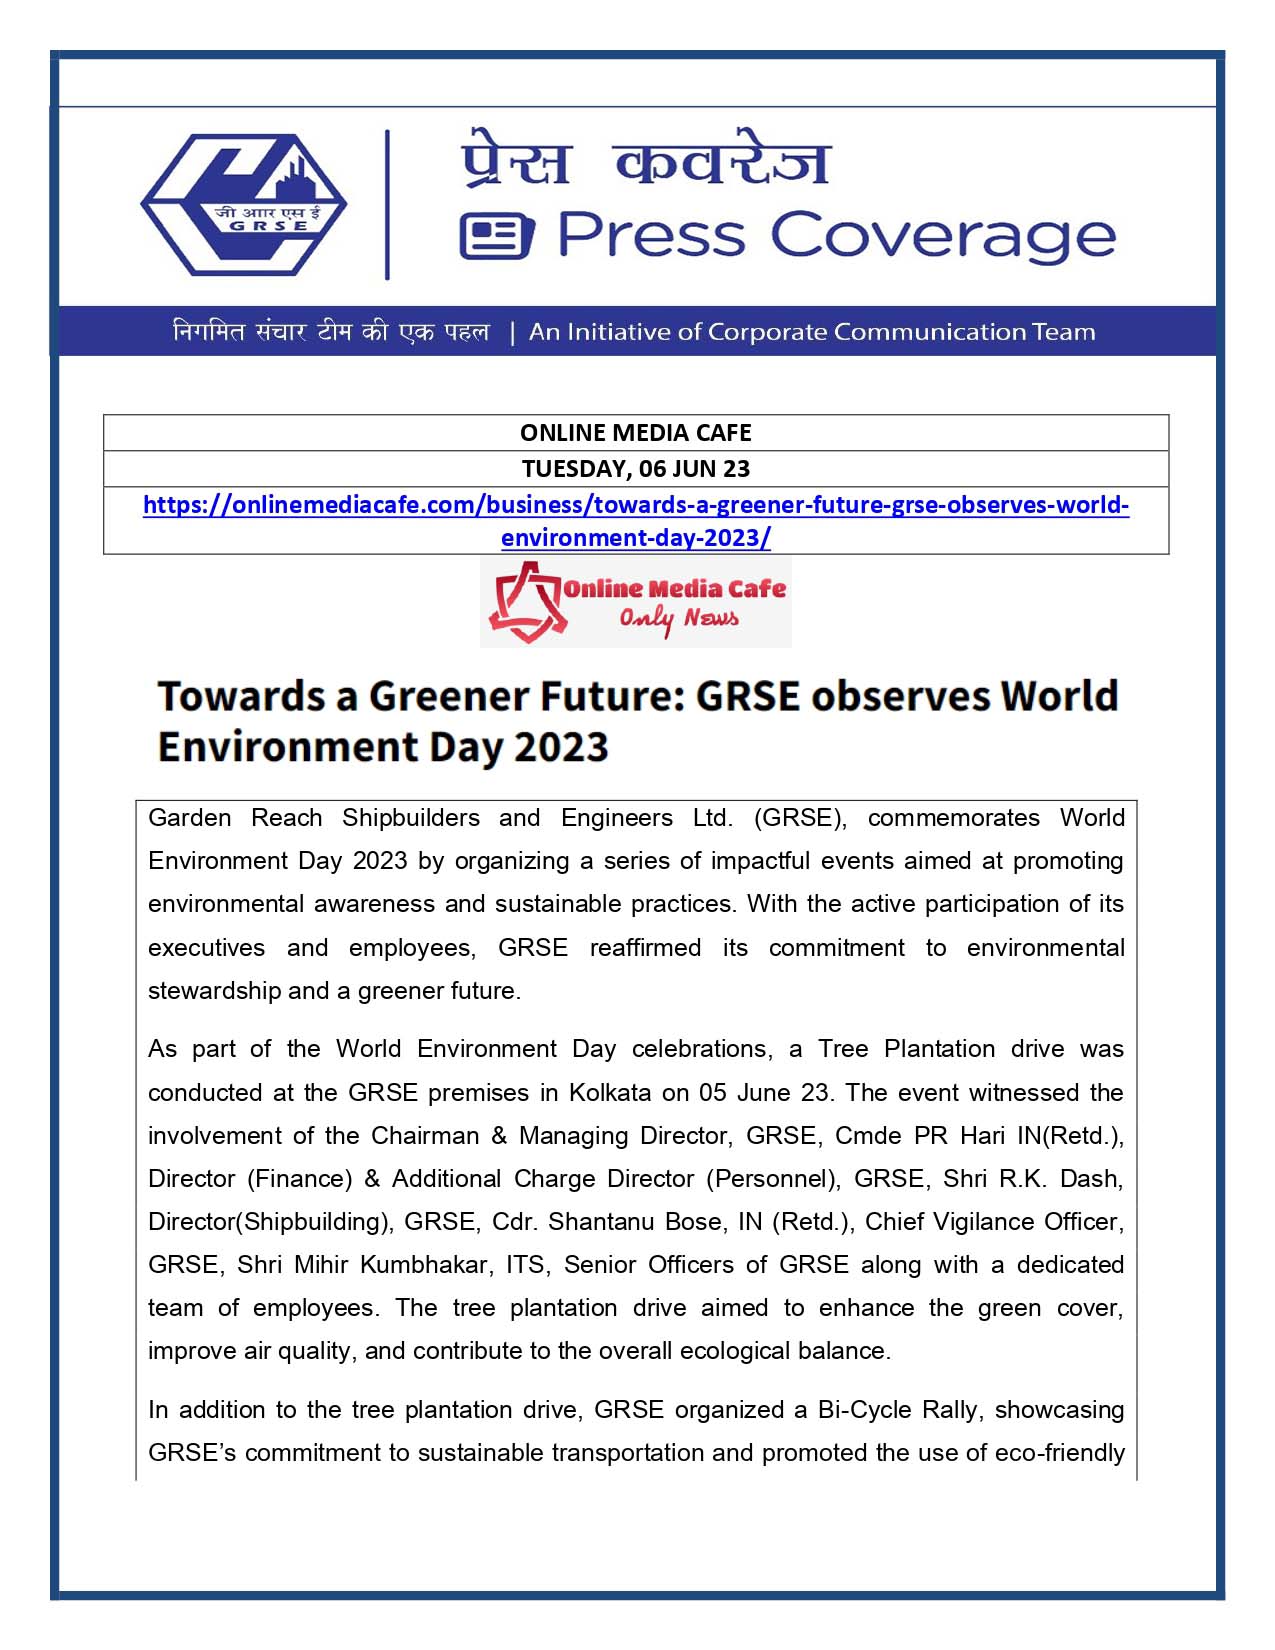 Towards a Greener Future : GRSE observes World Environment Day 2023